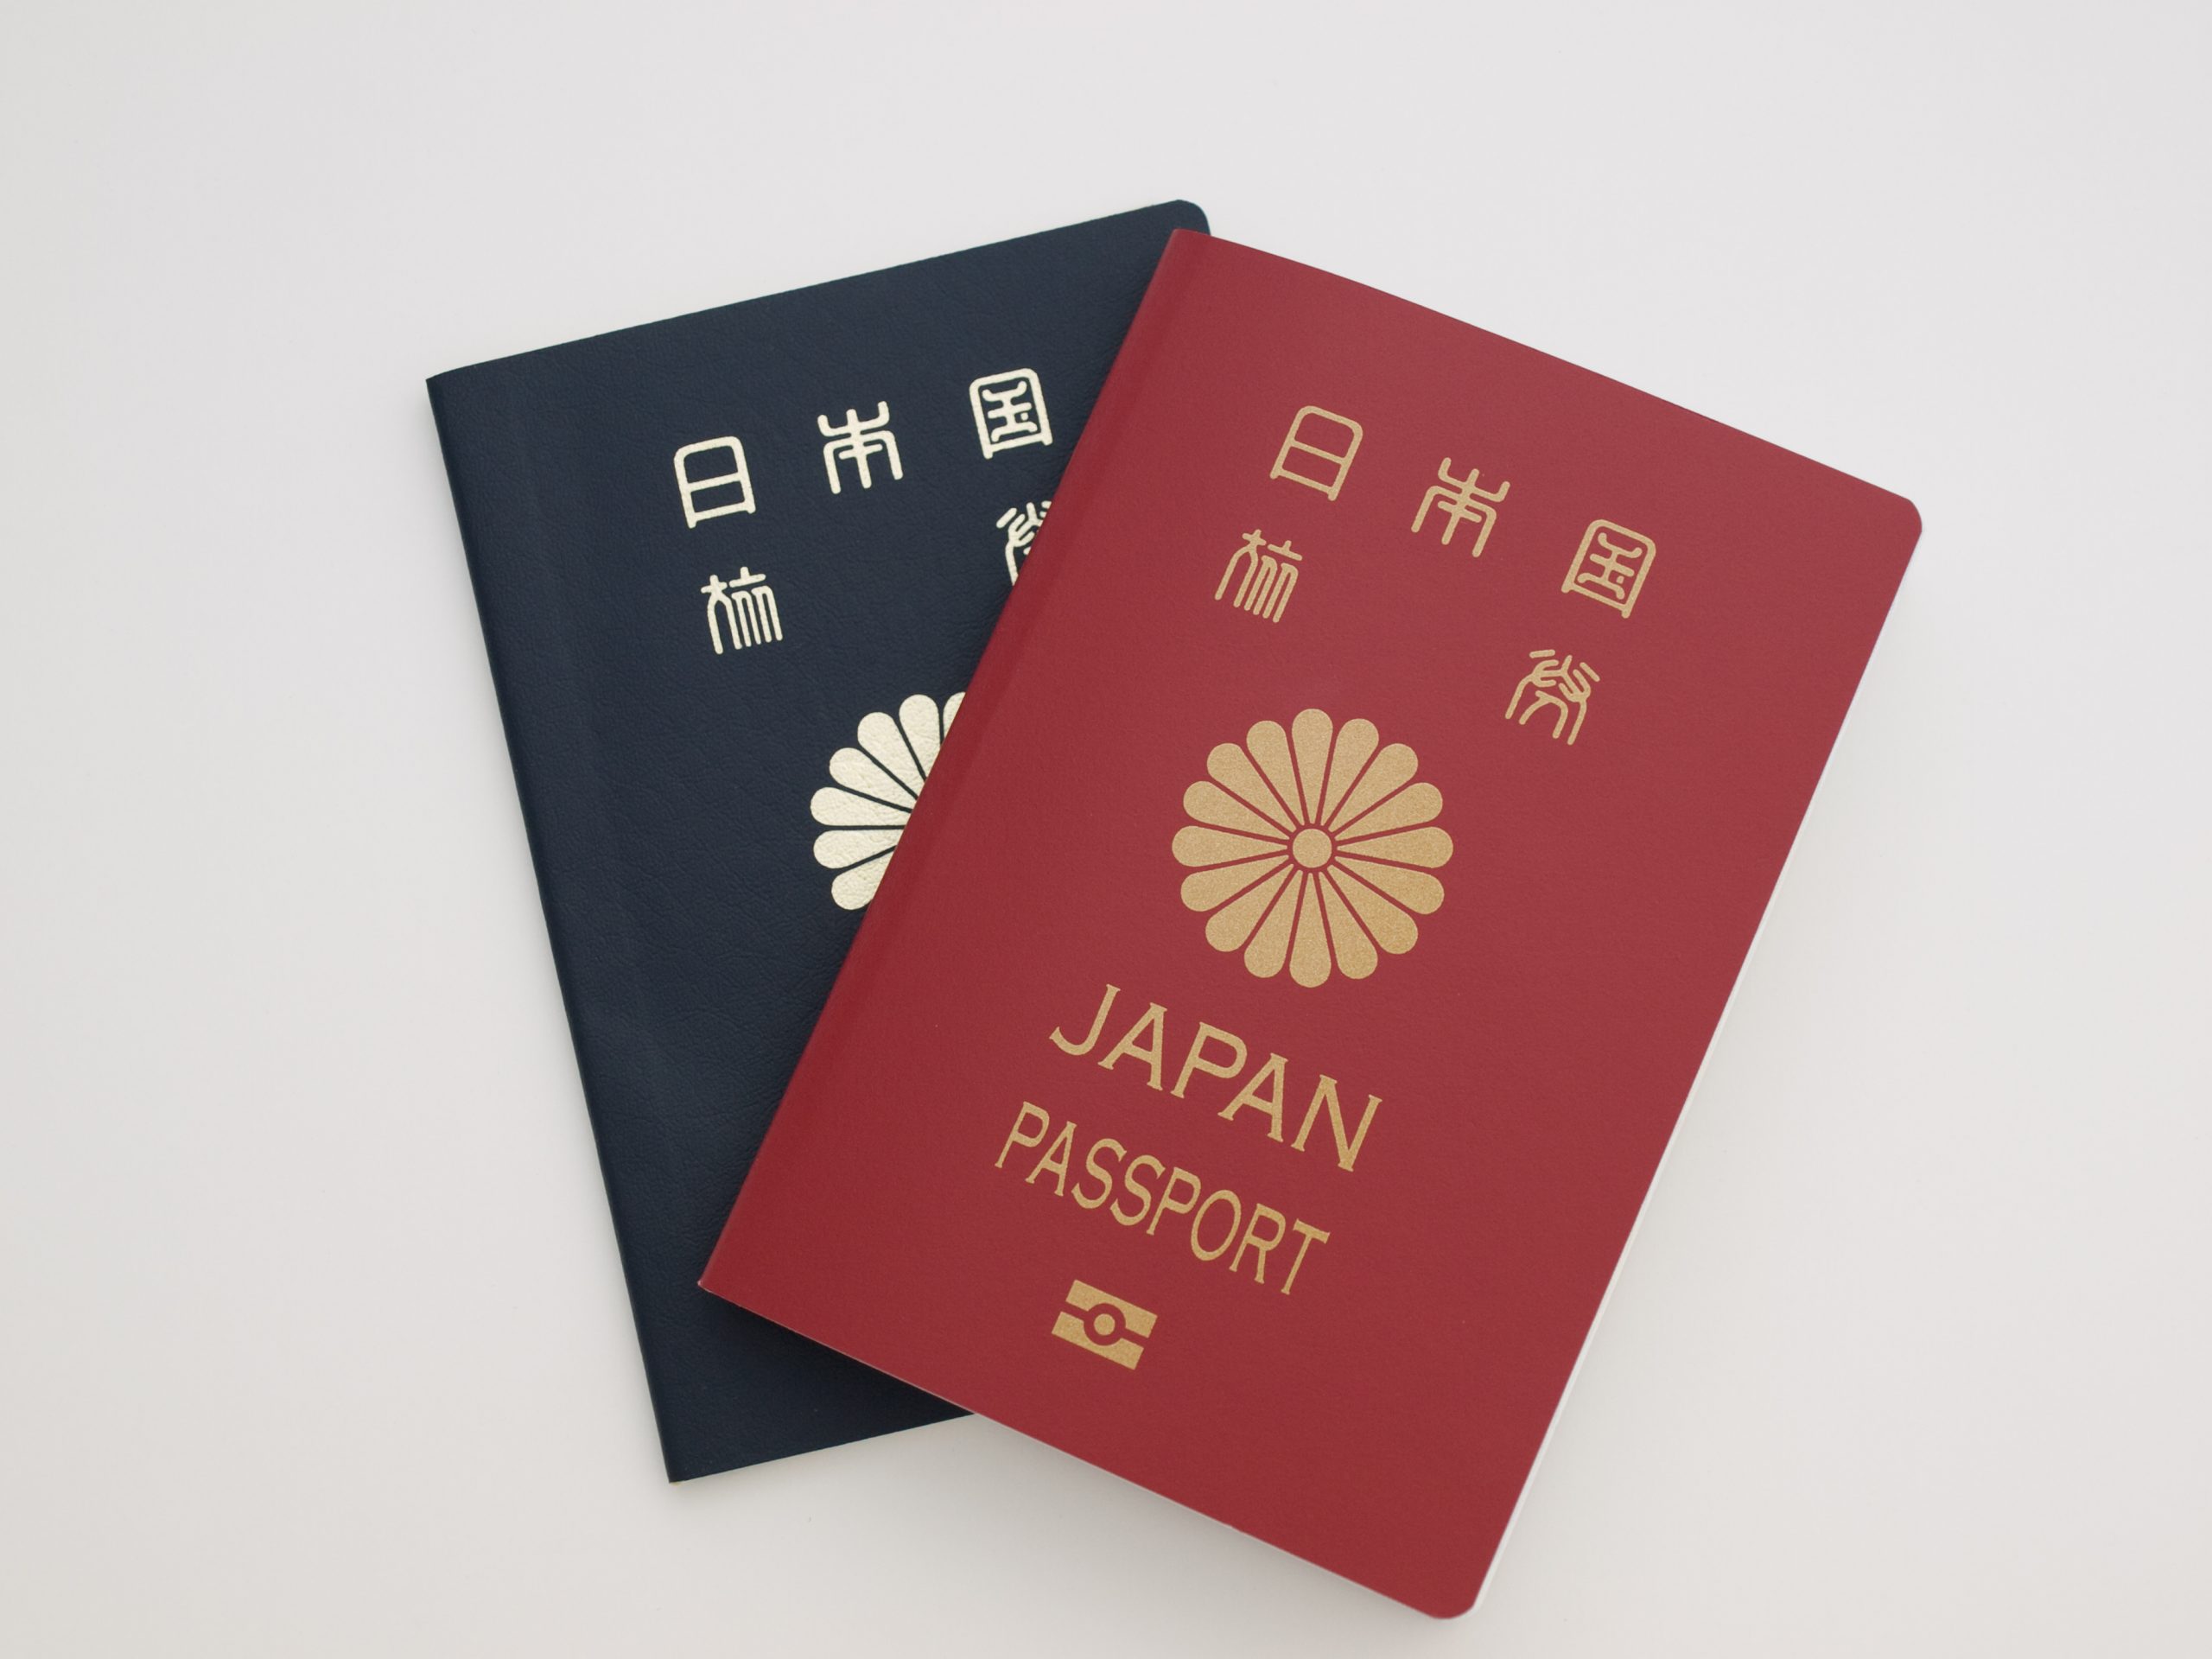 Redesigned Japanese passports to be issued this month｜Arab News Japan